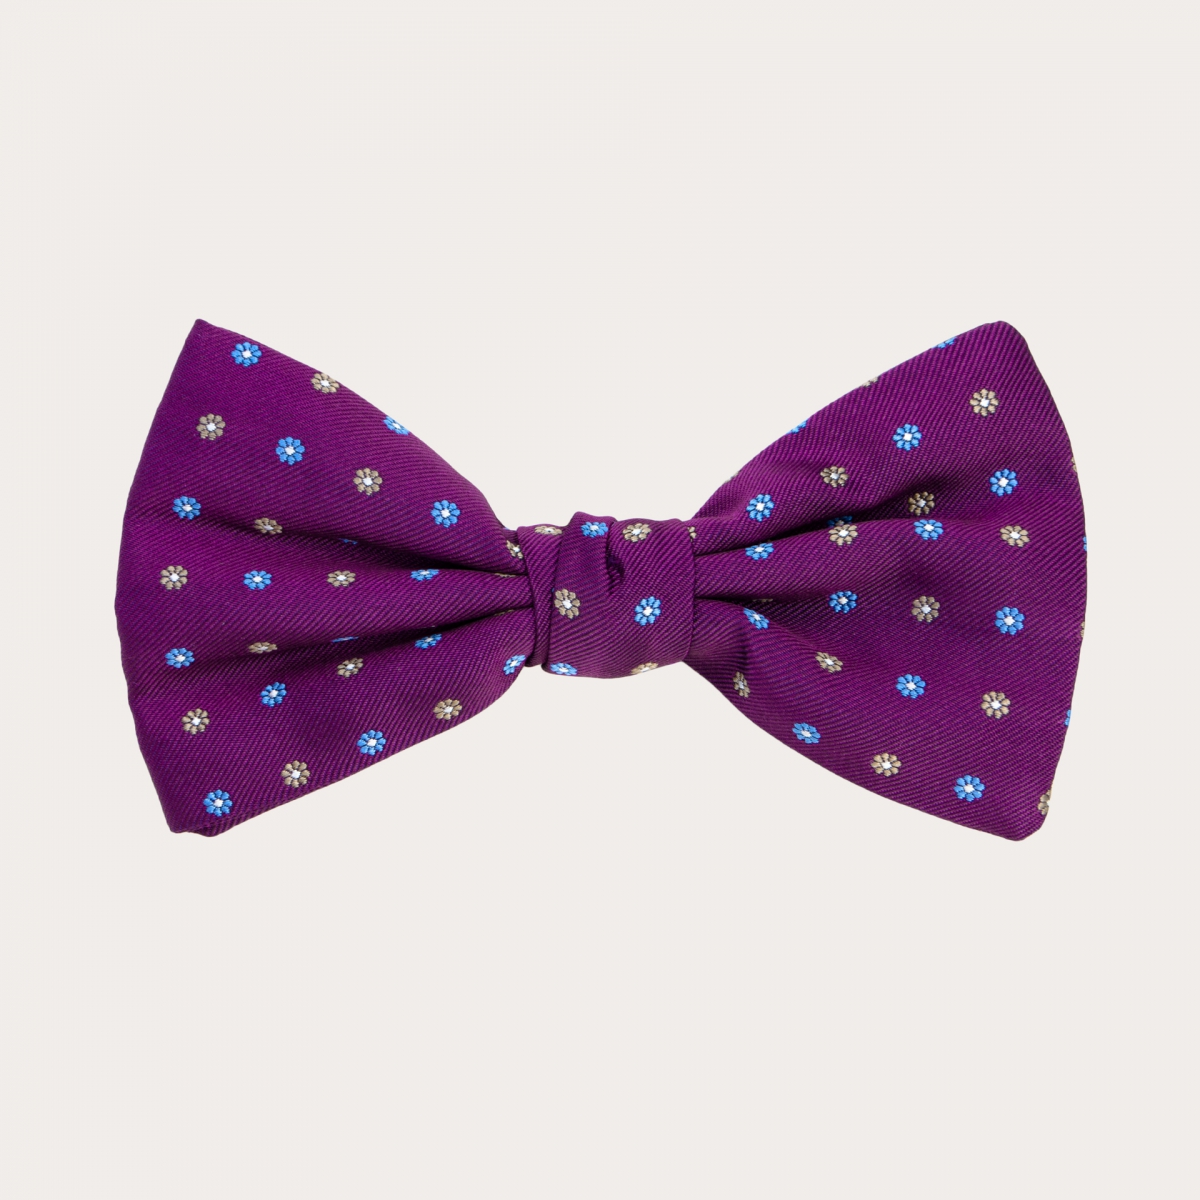 BRUCLE Purple bow tie with blue and yellow flowers pattern